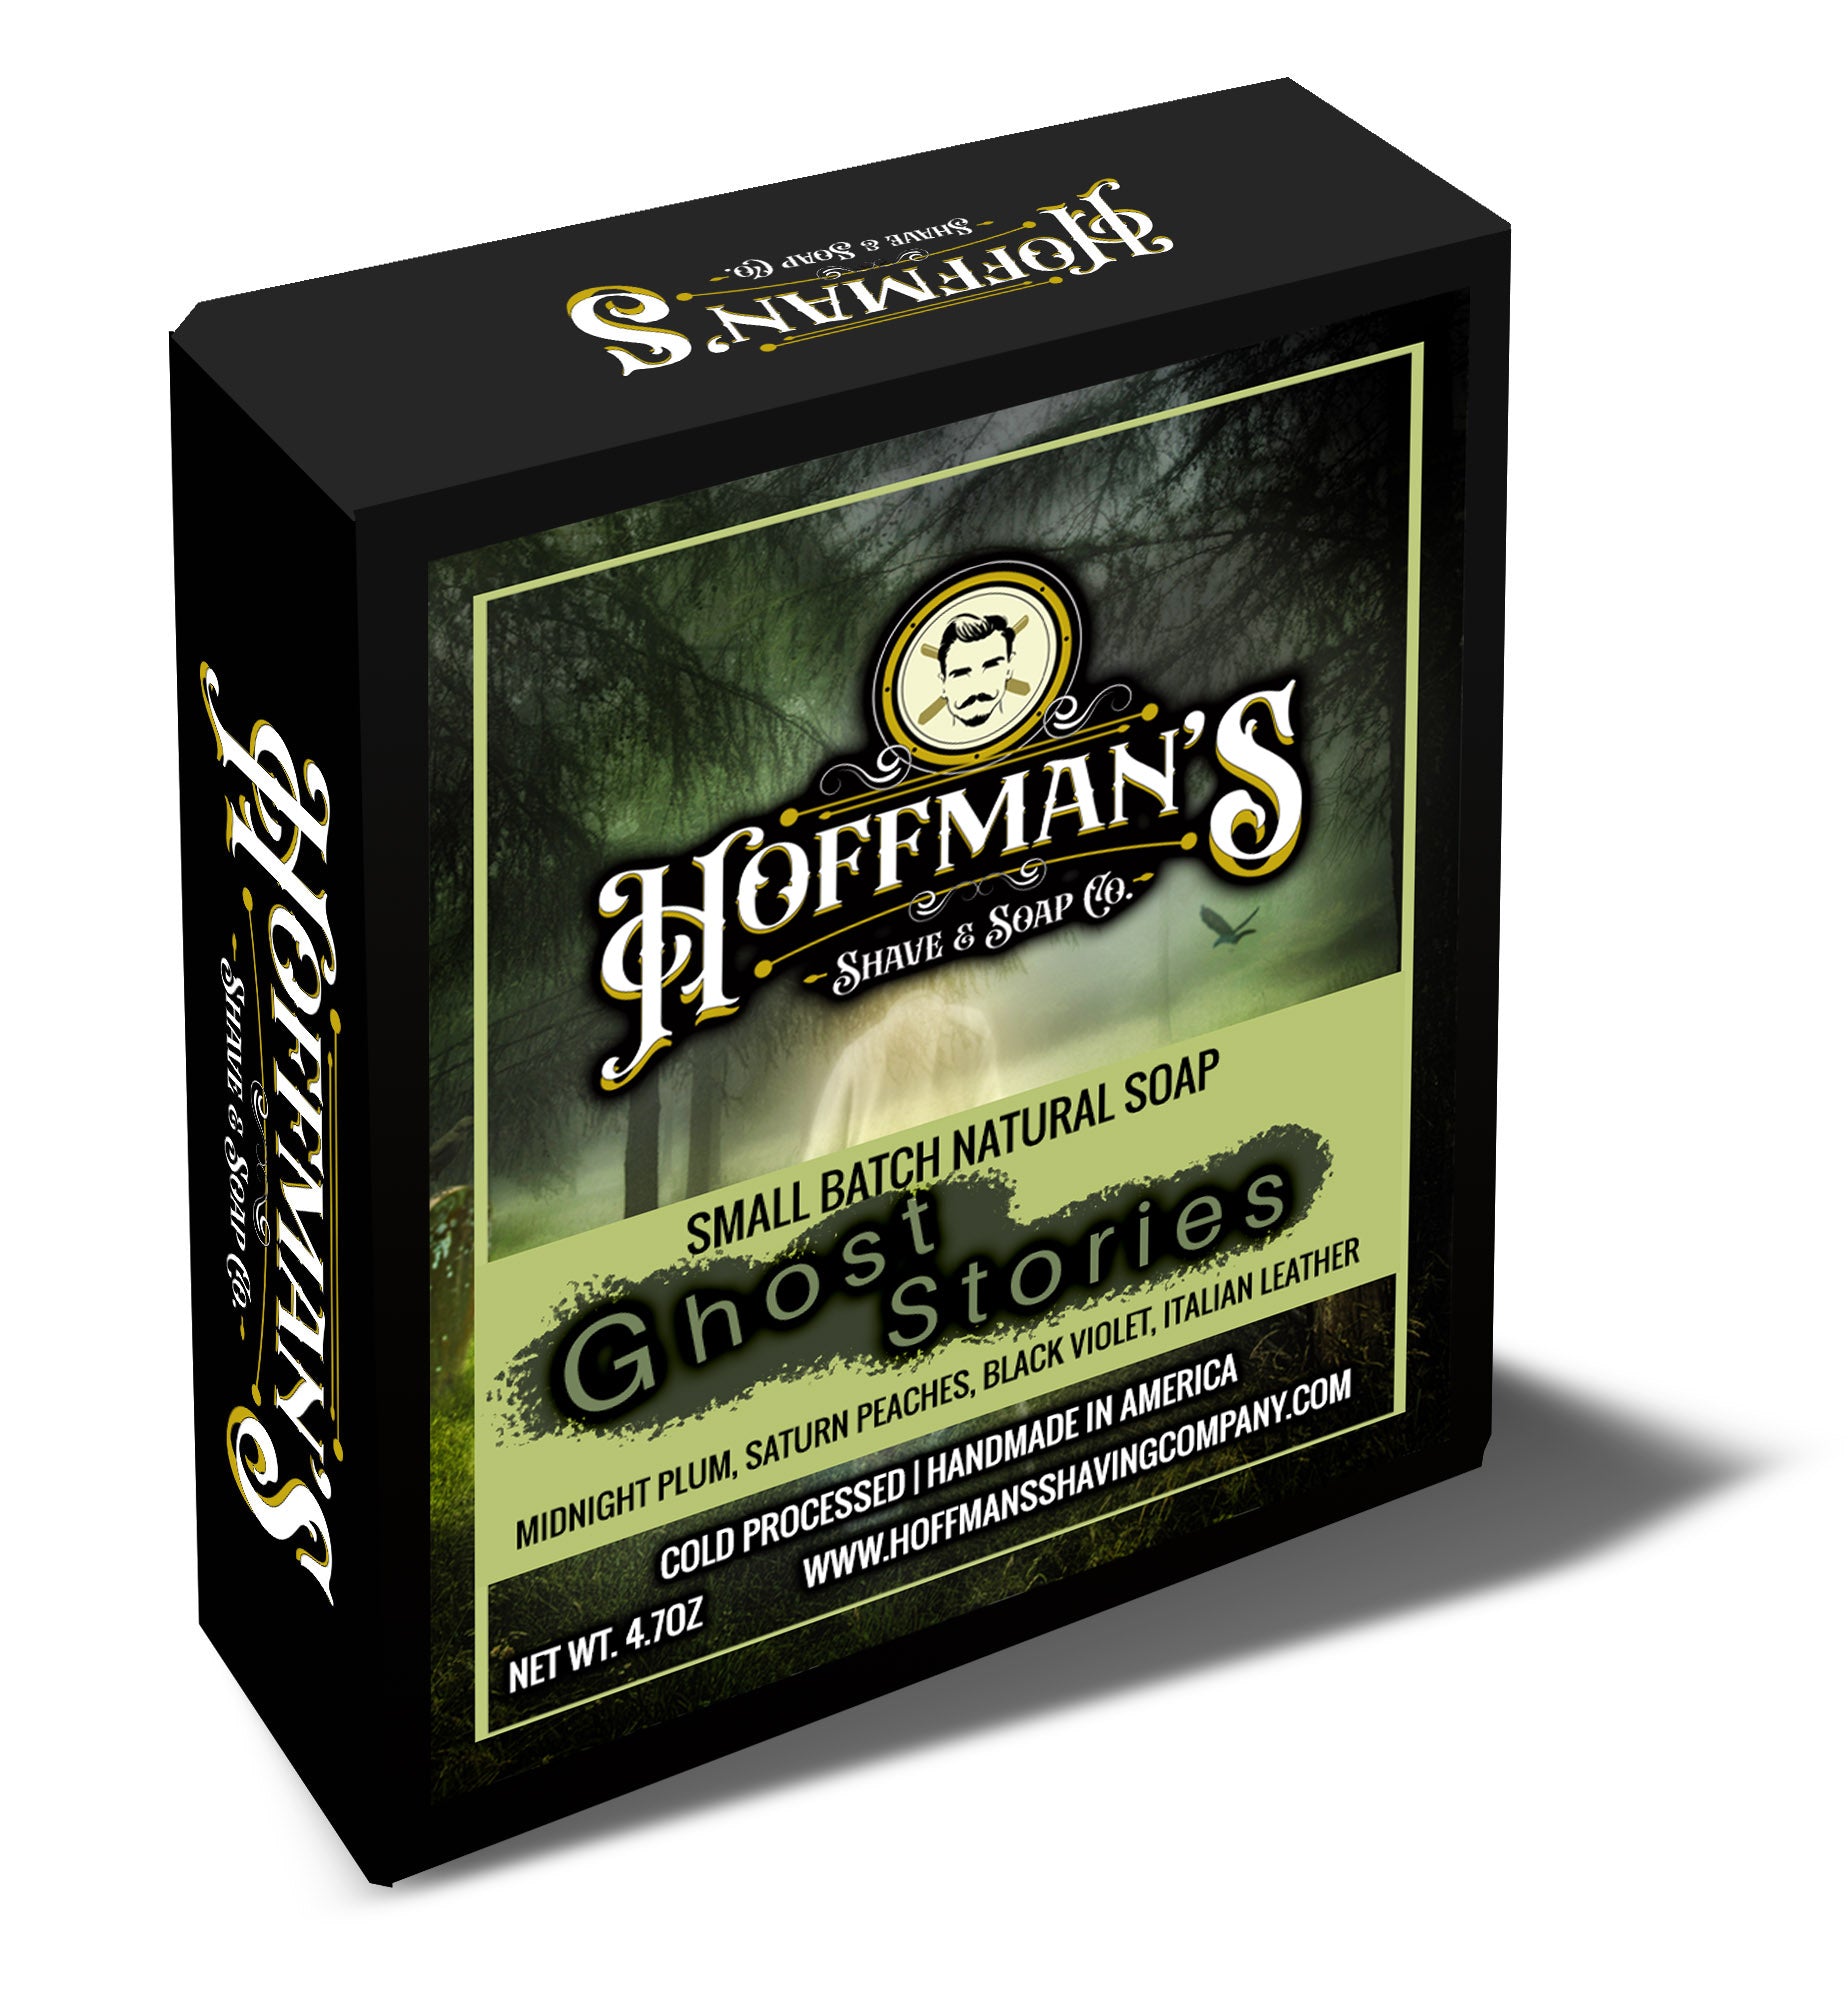 Plum Scented Soap Bar | Ghost Stories Body Soap | Hoffman's Grooming